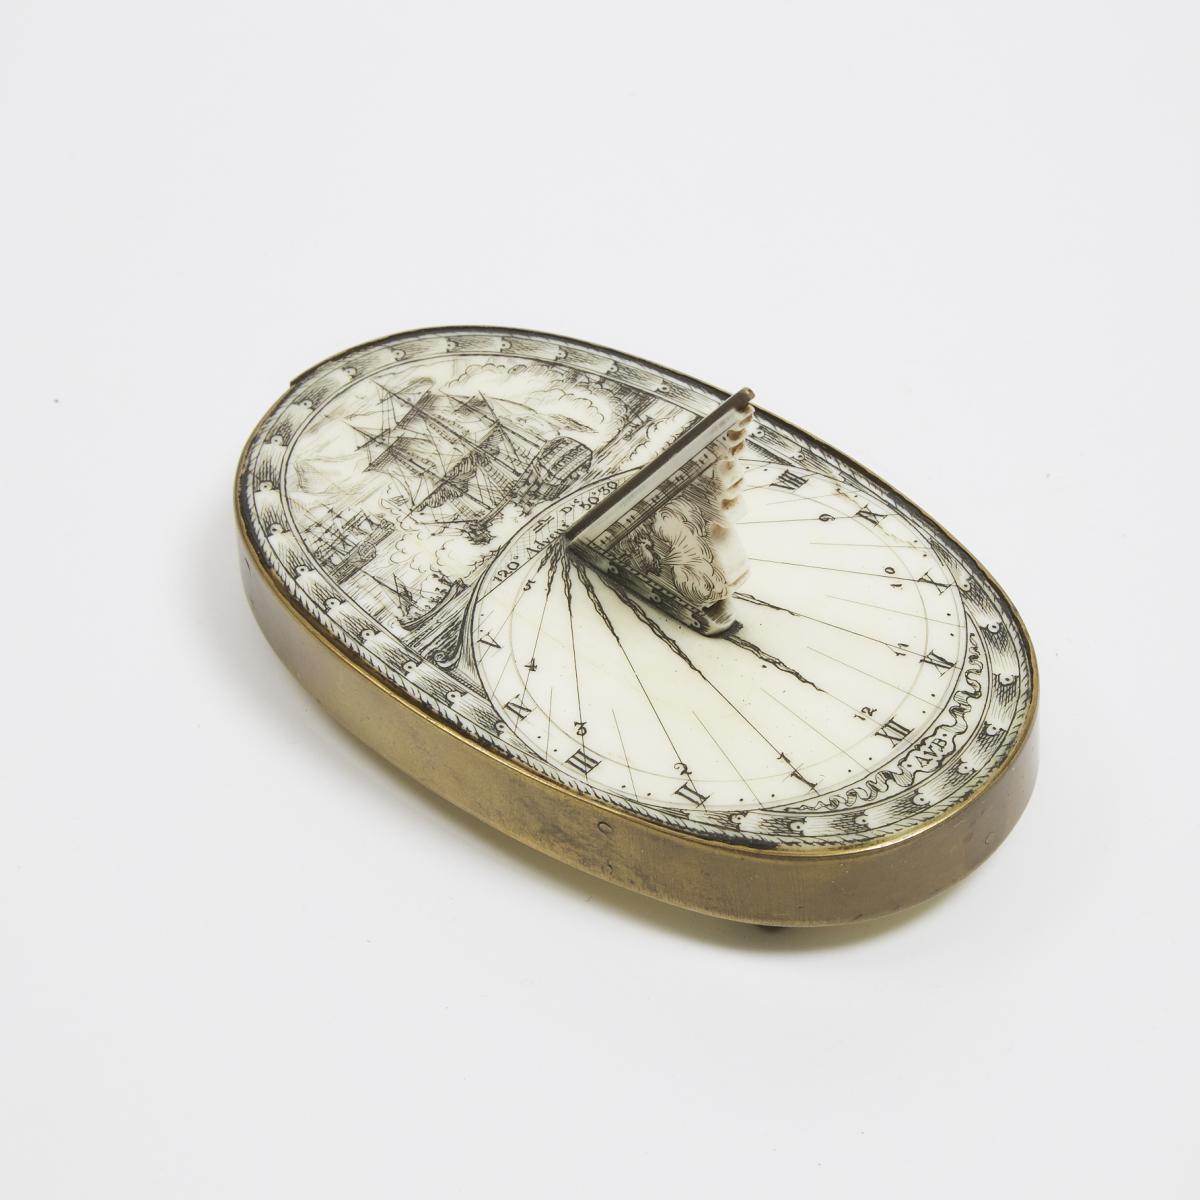 English Brass Mounted Engraved Ivory Desk Top Sundial, late 19th century, 2.75 in — 7 cm, length 5 i